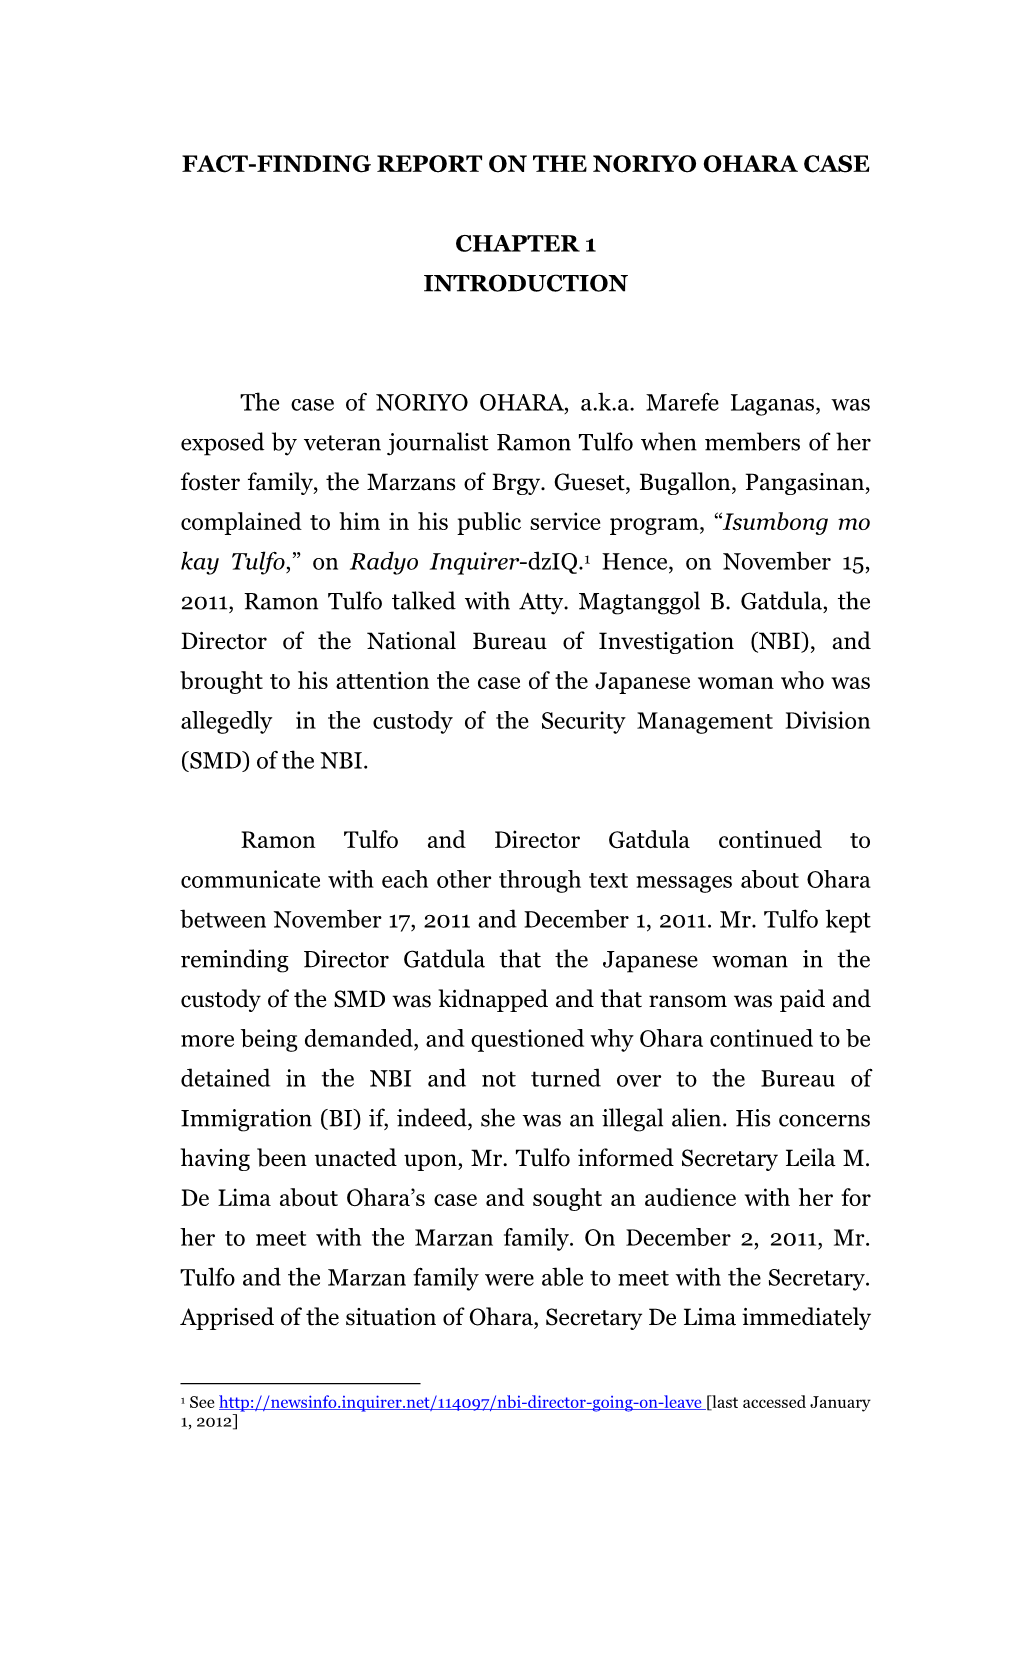 FACT-FINDING REPORT on the NORIYO OHARA CASE CHAPTER 1 INTRODUCTION the Case of NORIYO OHARA, A.K.A. Marefe Laganas, Was Exposed